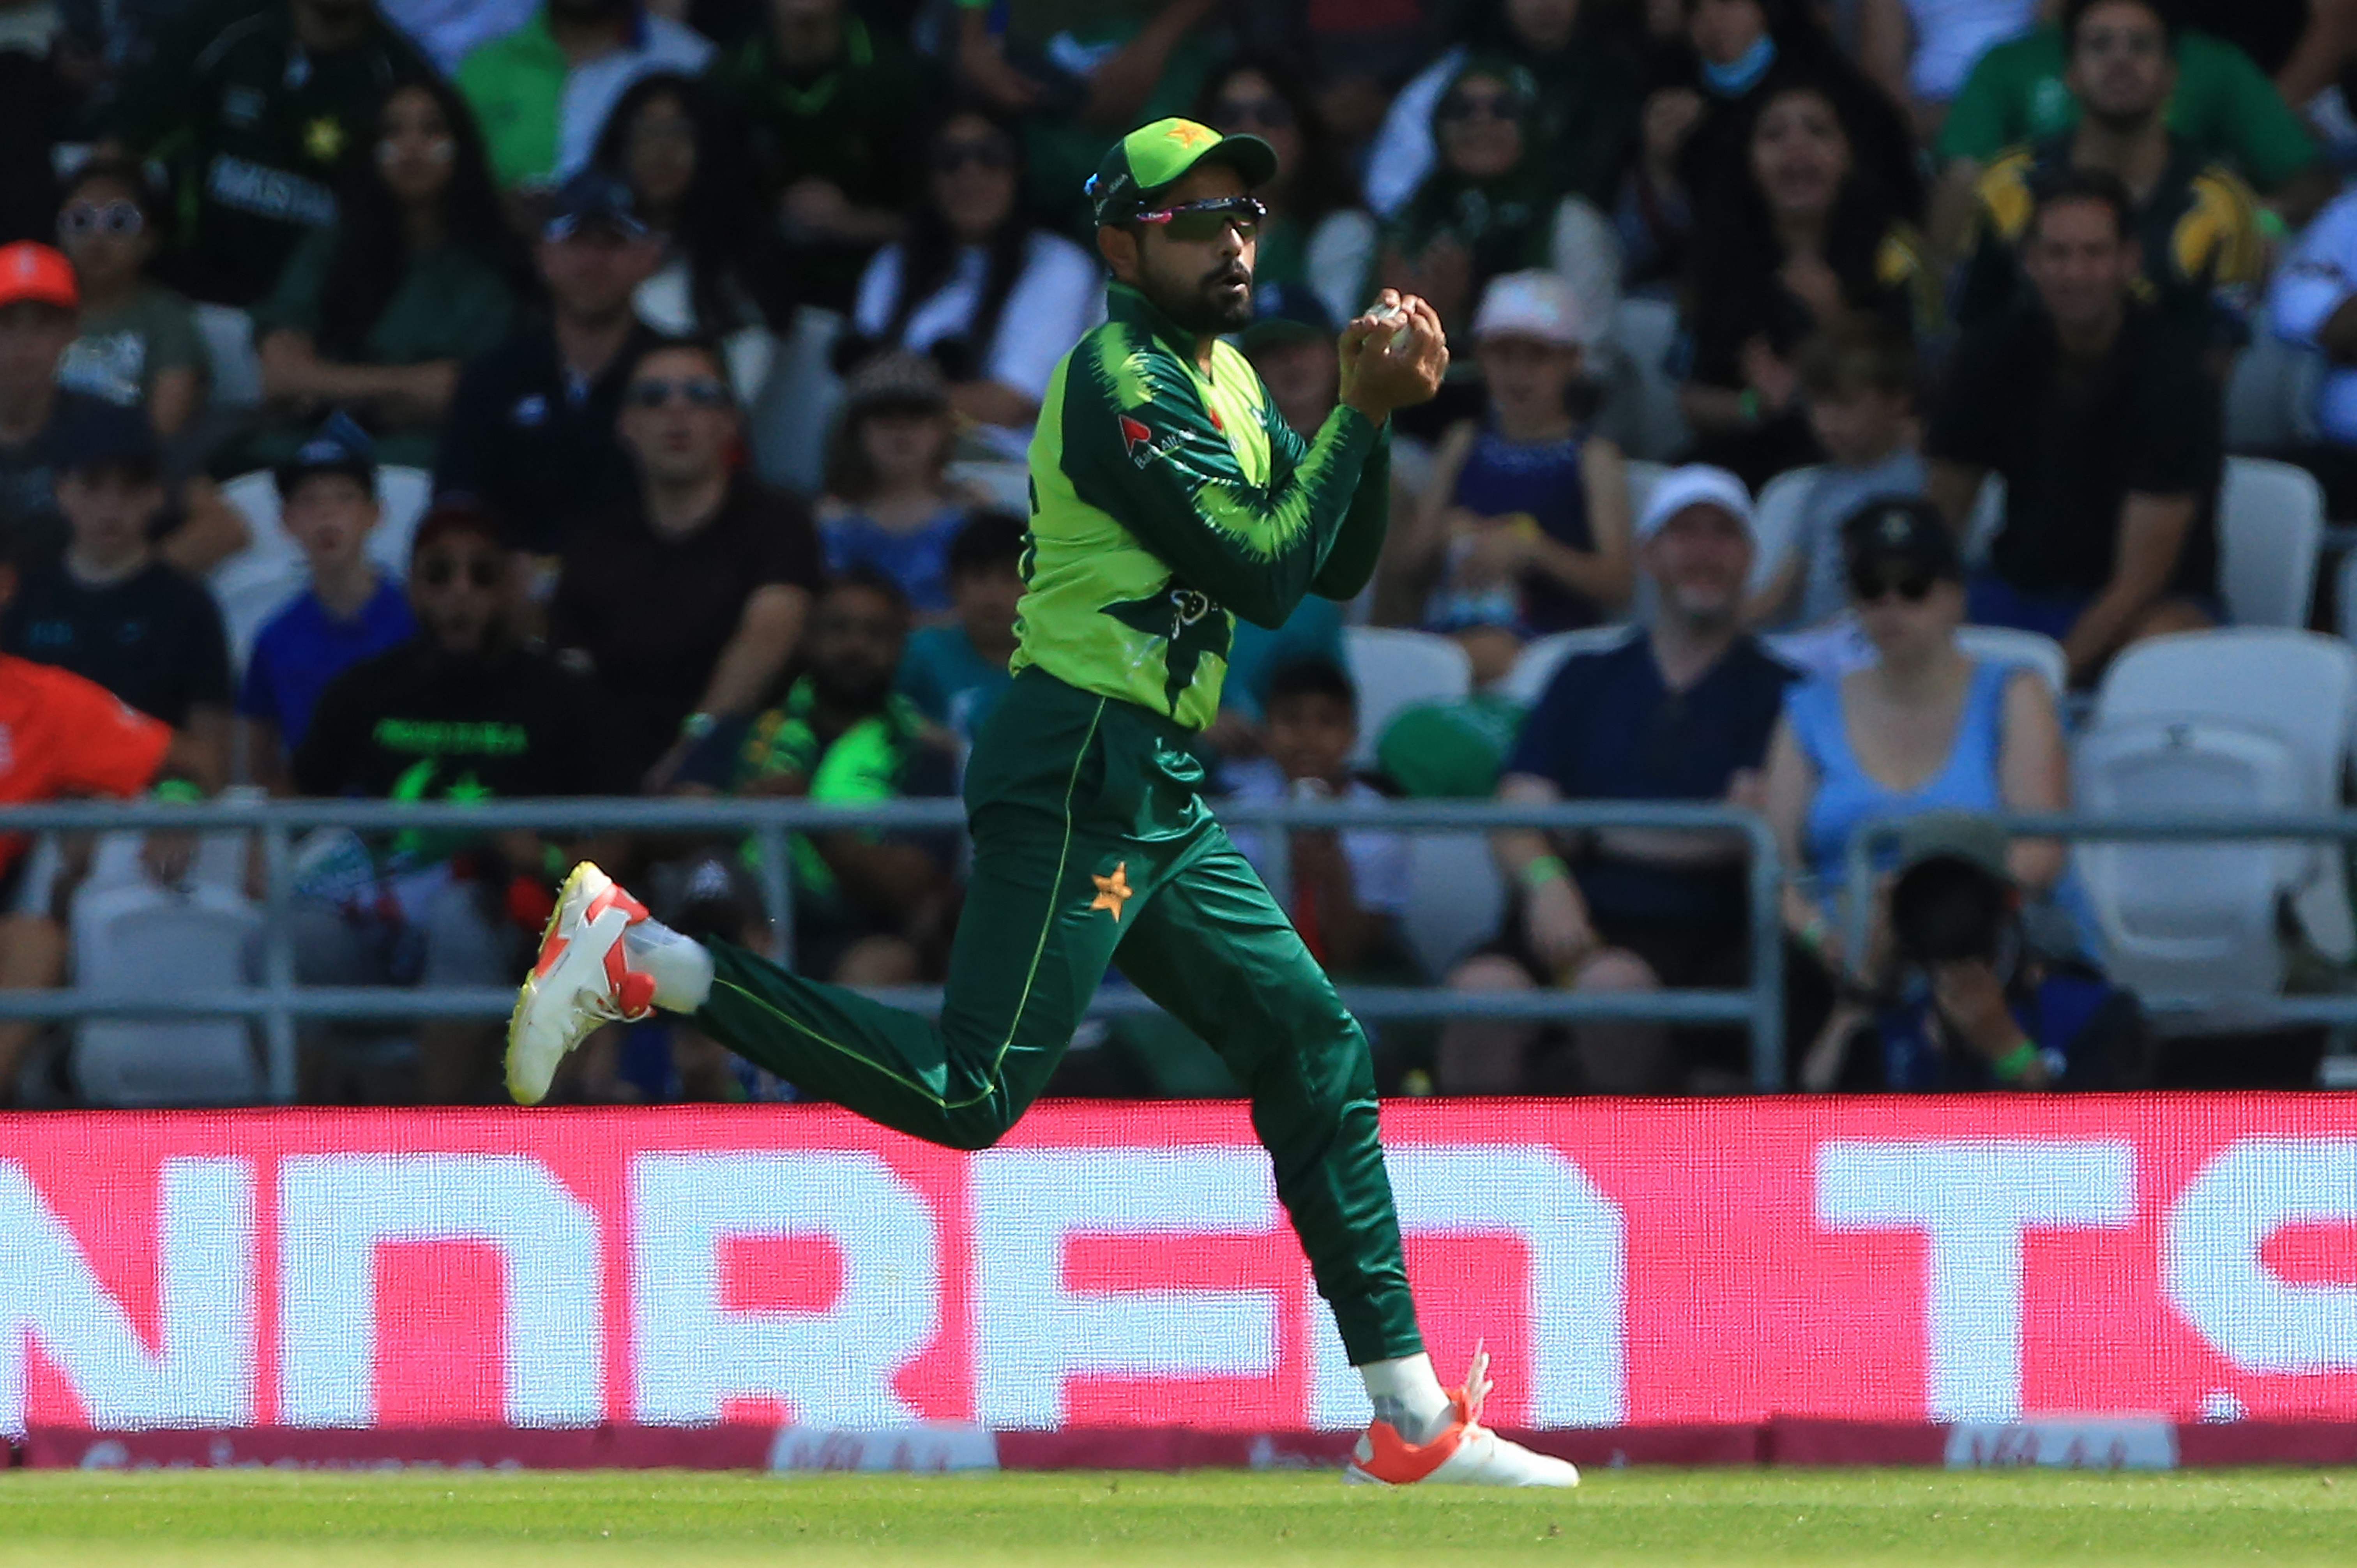 Pakistan's Babar Azam takes a catch to dismiss England's Moeen Ali.